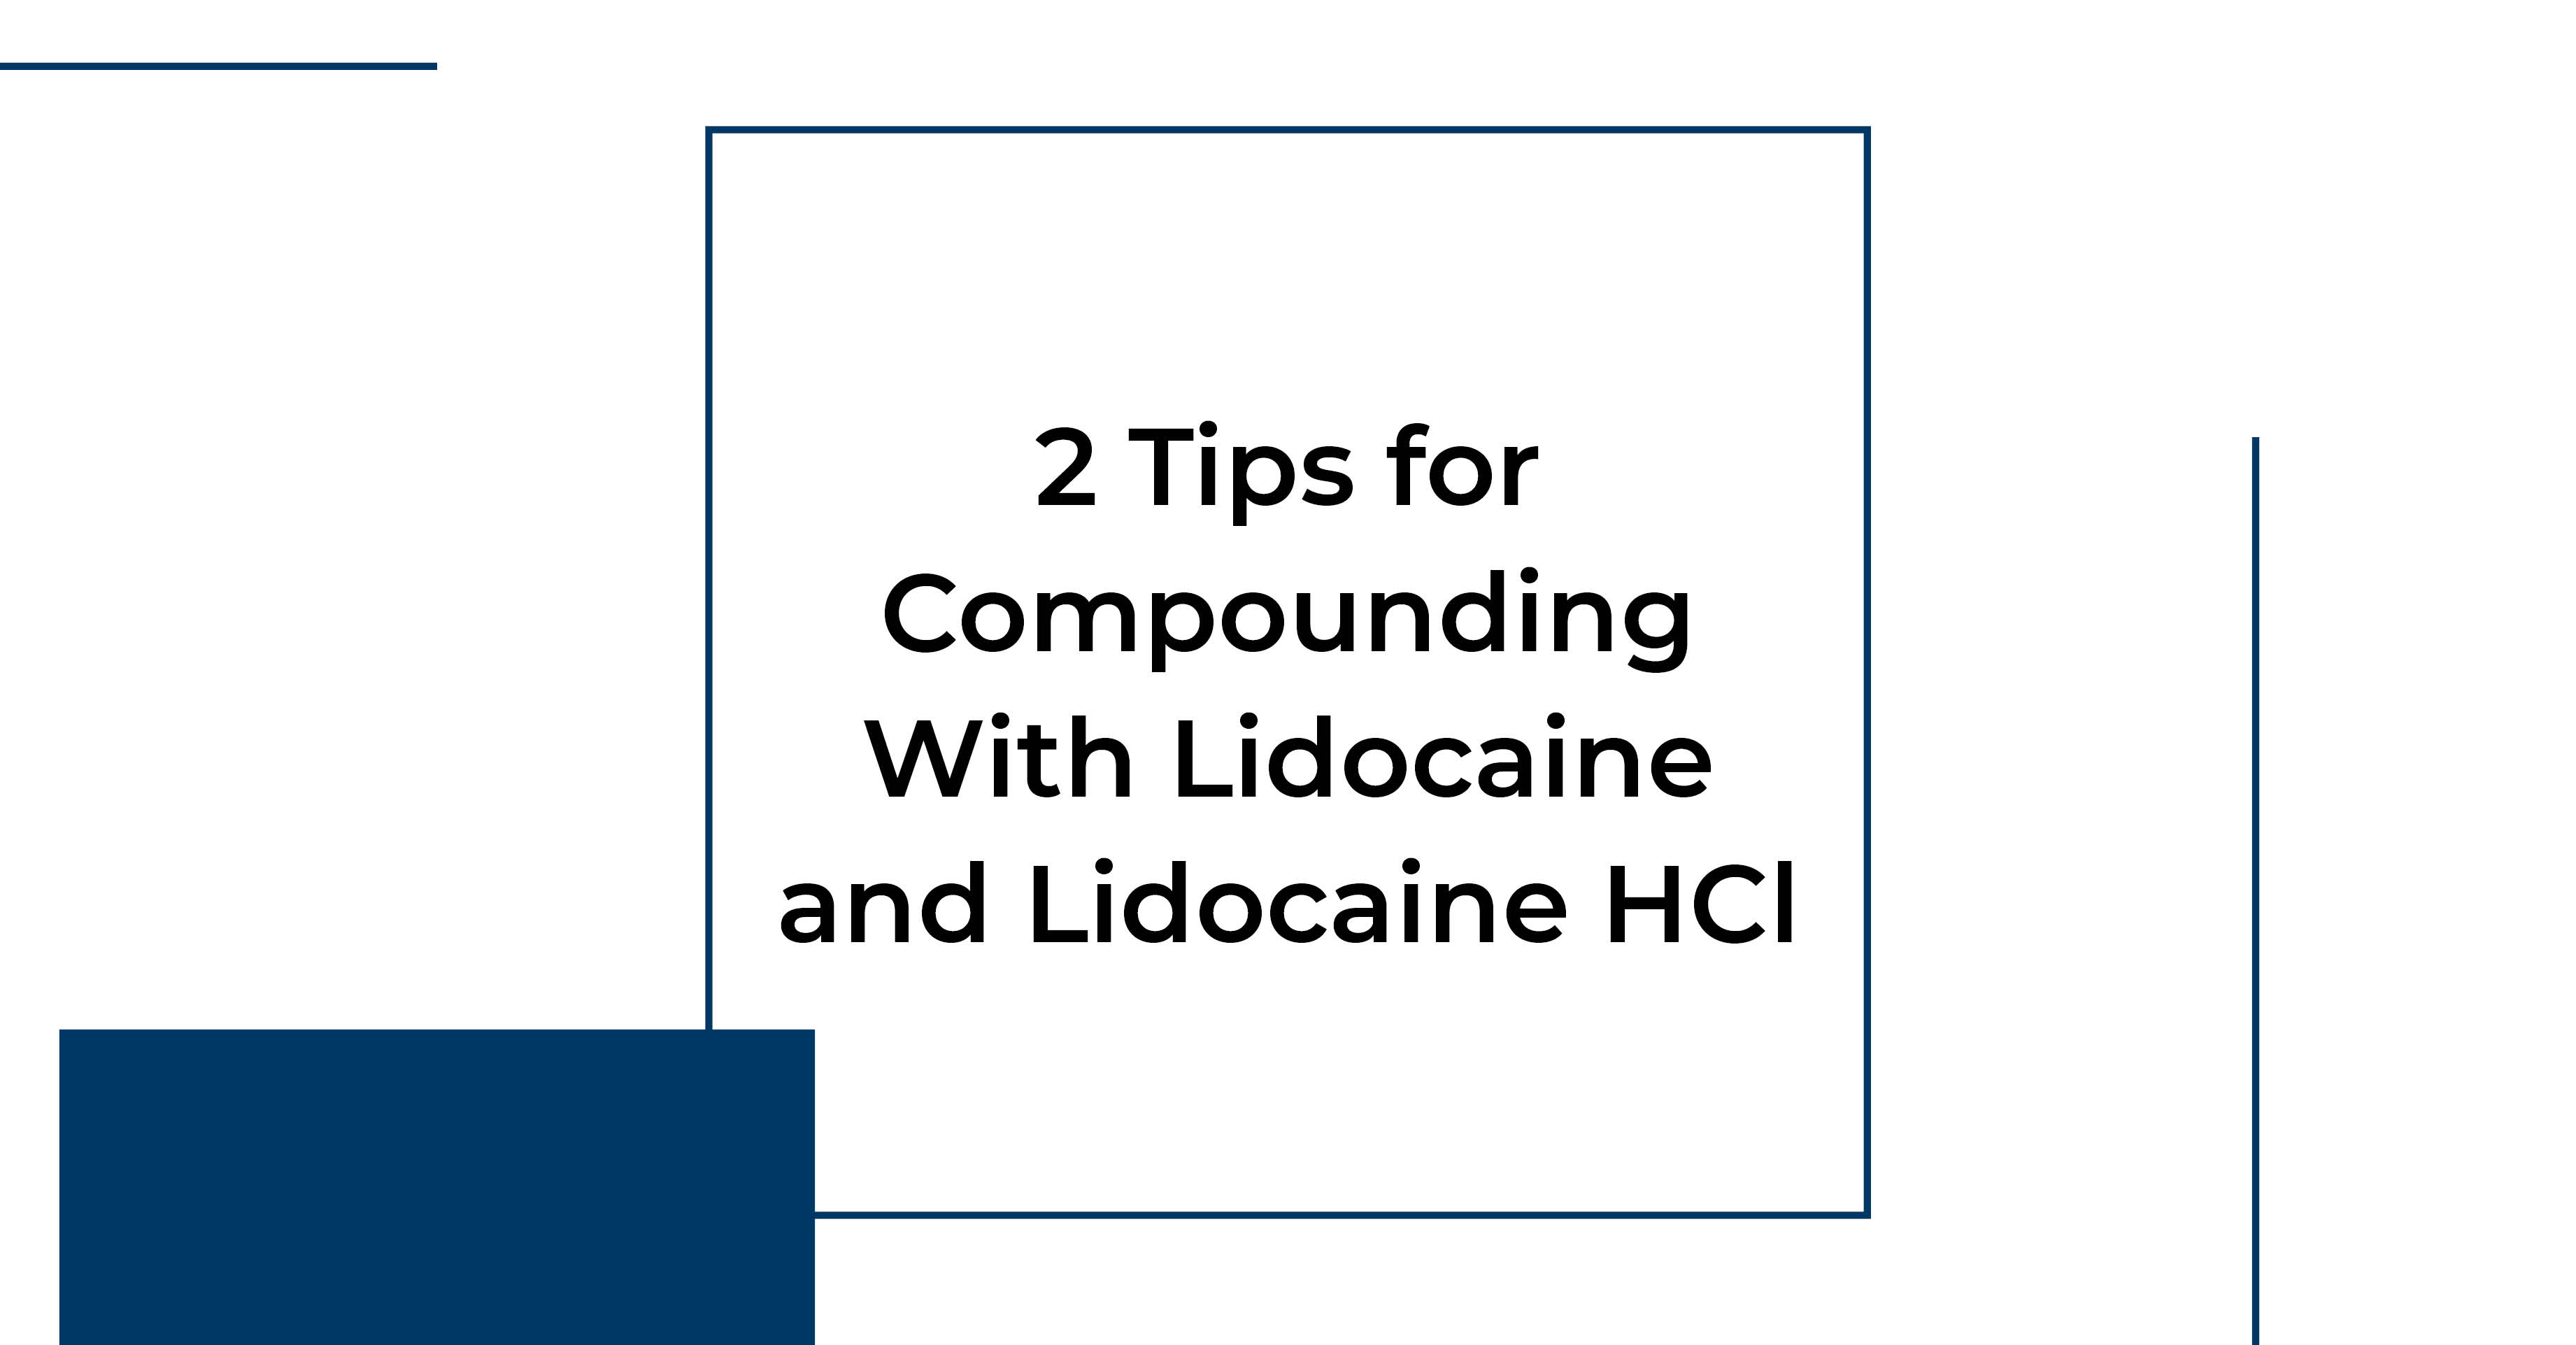 2_tips_for_compounding_with_lidocaine_and_lidocaine_hcl.jpg.